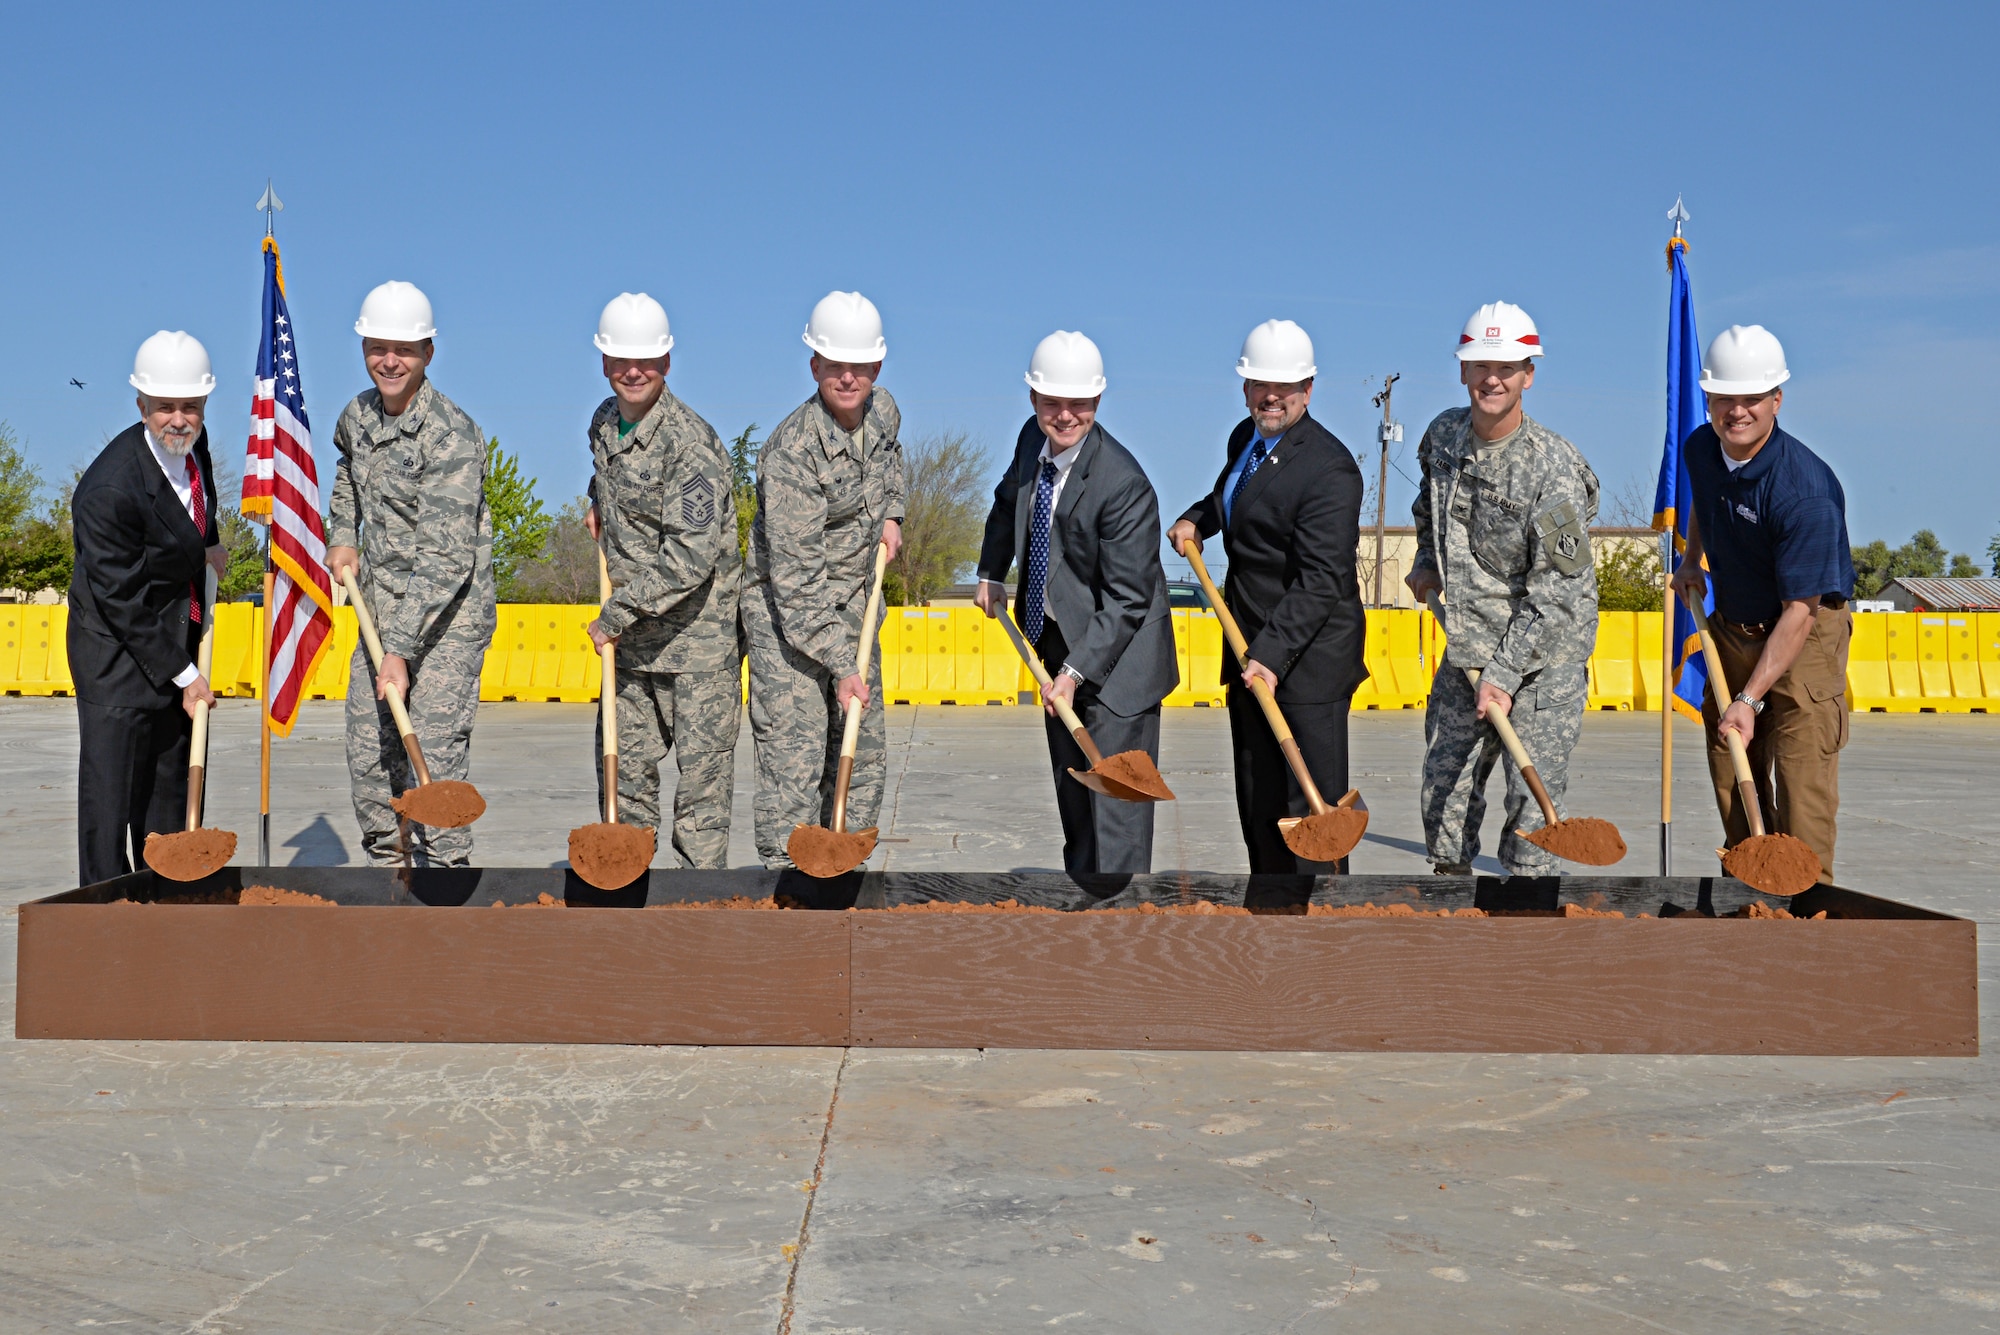 Beale leadership, Congressman John Garamendi representatives, a member of the Army Corps of Engineers, and the facility building contractors break ground for the initiation of construction of the 9th Civil Engineer Squadron Administration and Operations Facility at Beale Air Force Base, Calif., April 3, 2015. The 9th CES structure is planned to be a 43,000 square foot facility, costing $15.9 million. (U.S. Air Force photo by Airman 1st Class Ramon A. Adelan/Released)